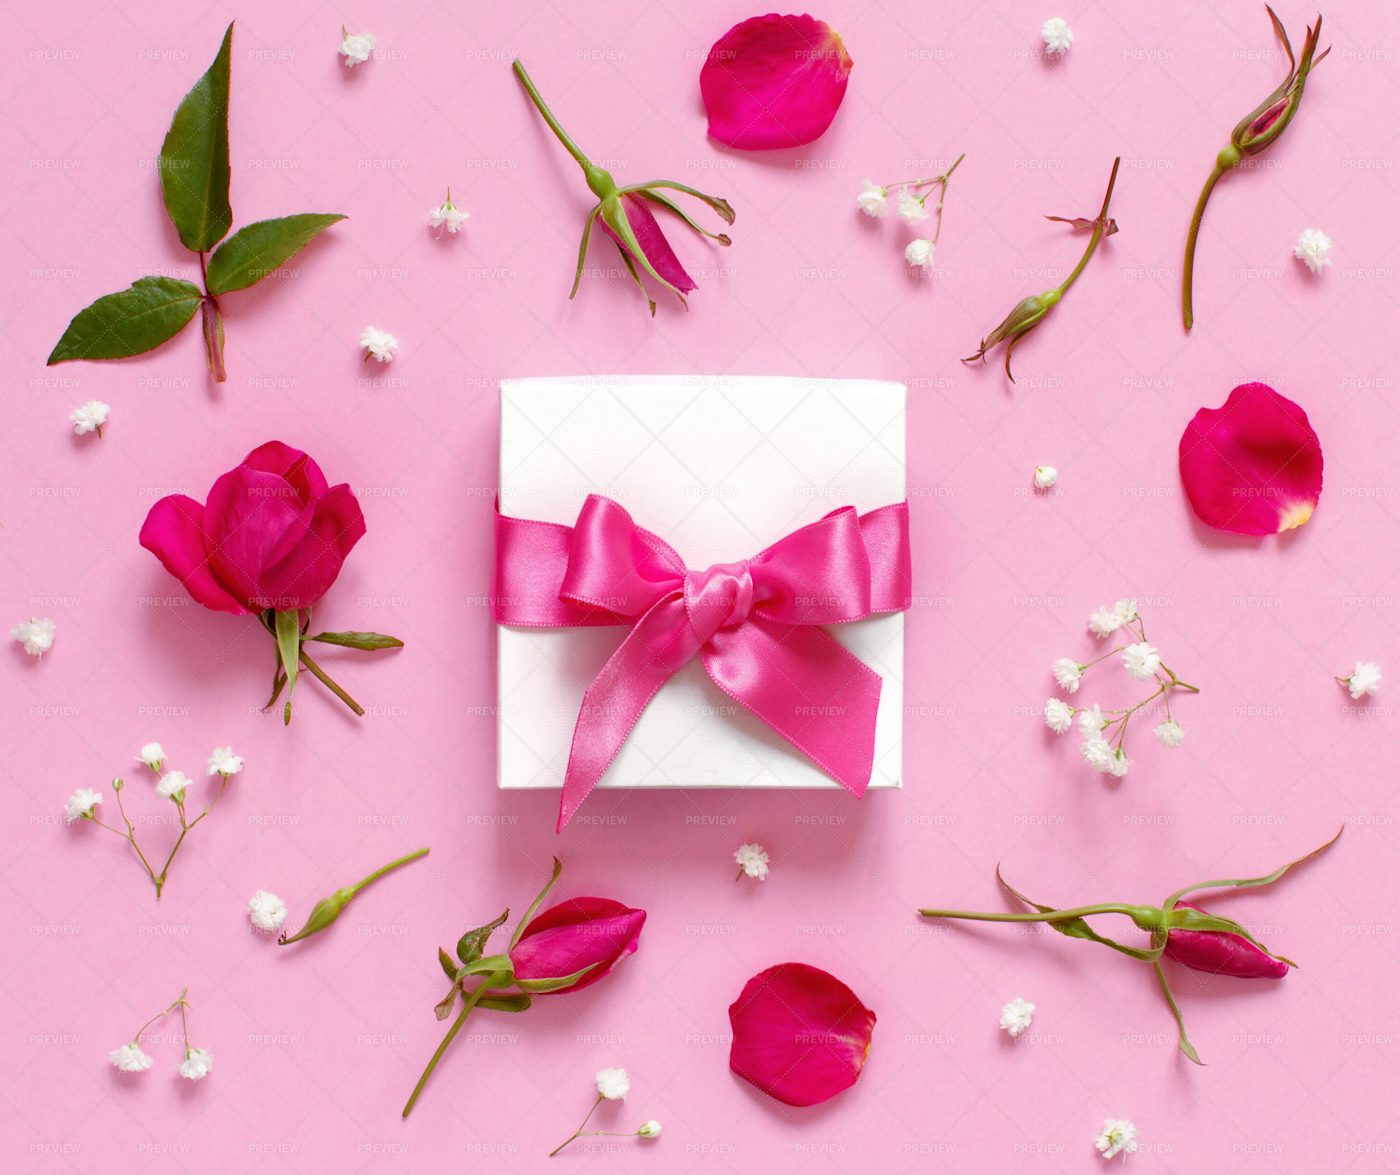 White Gift Box And Flowers: Stock Photos